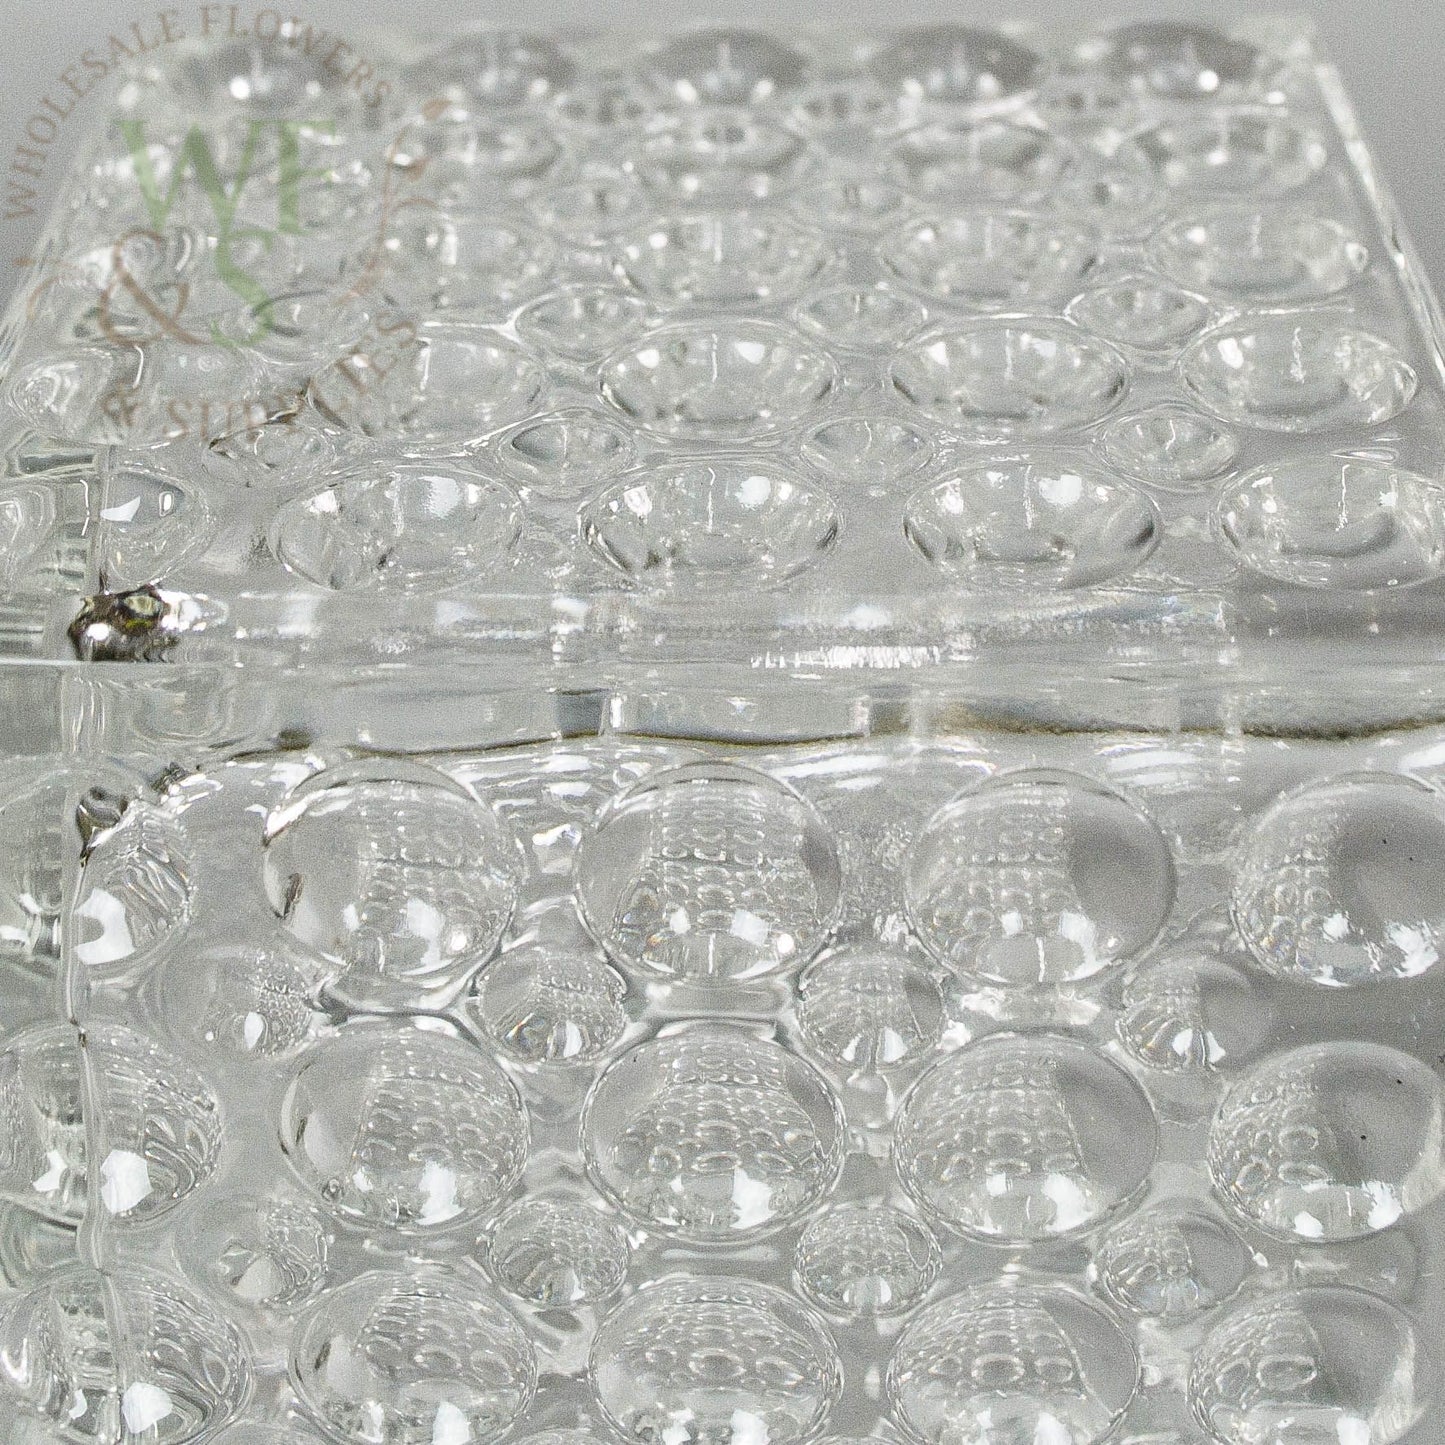 Square Clear Glass Cube Vase Dimple Effect 5" x 5"